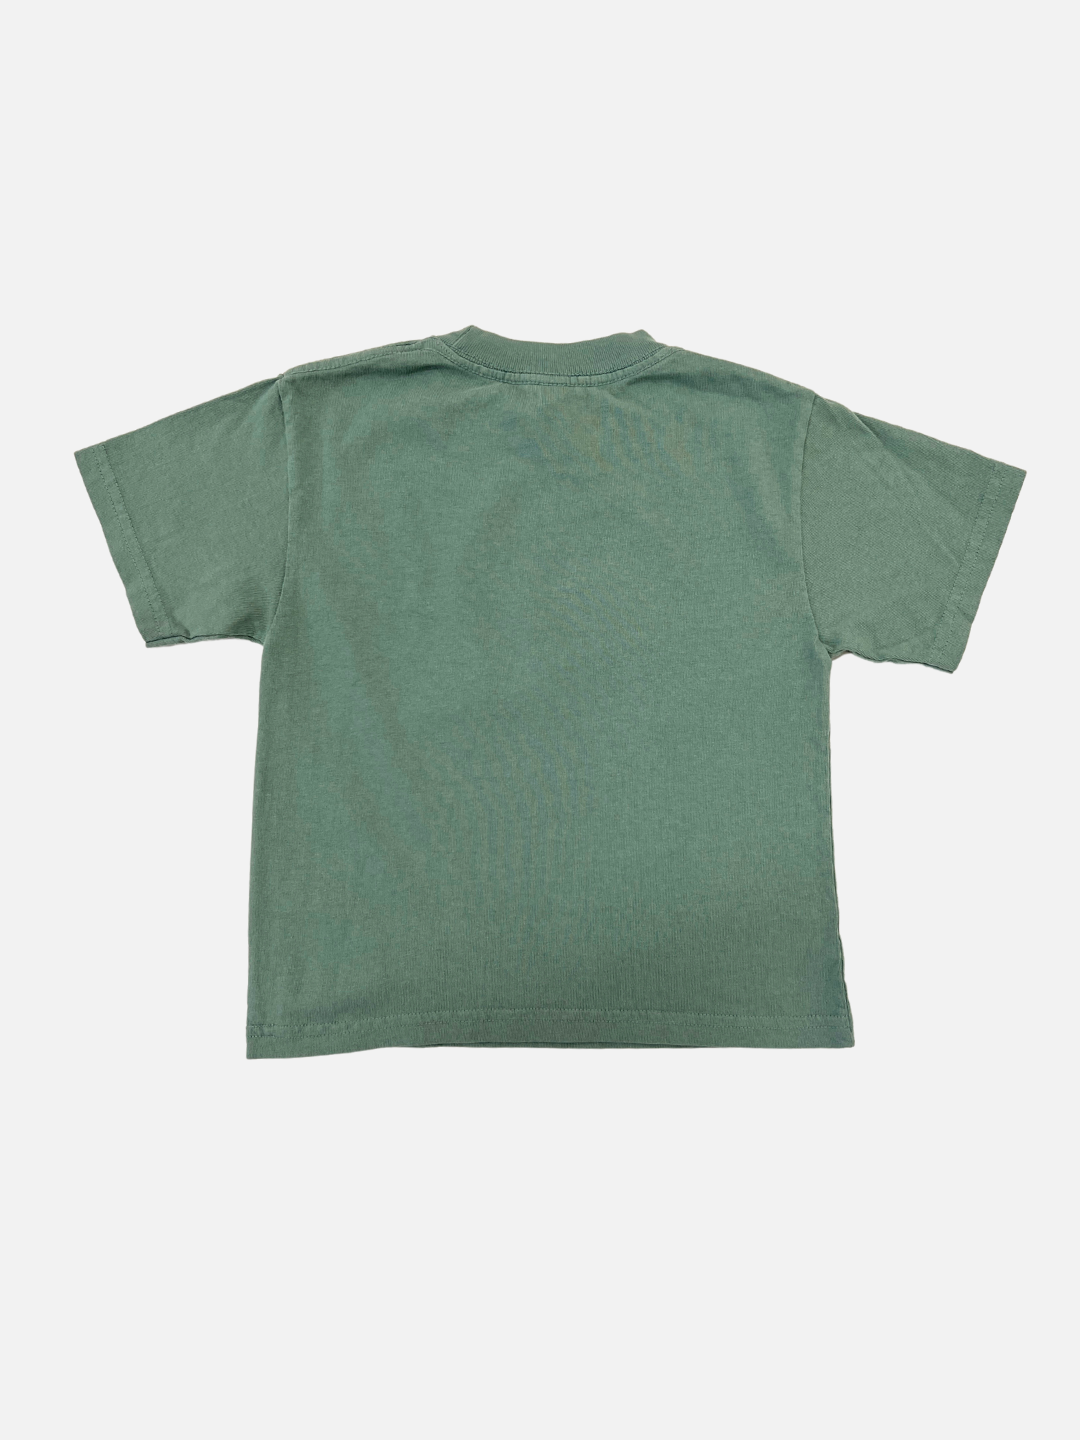 Back view of a kids faded green t-shirt with short sleeves.